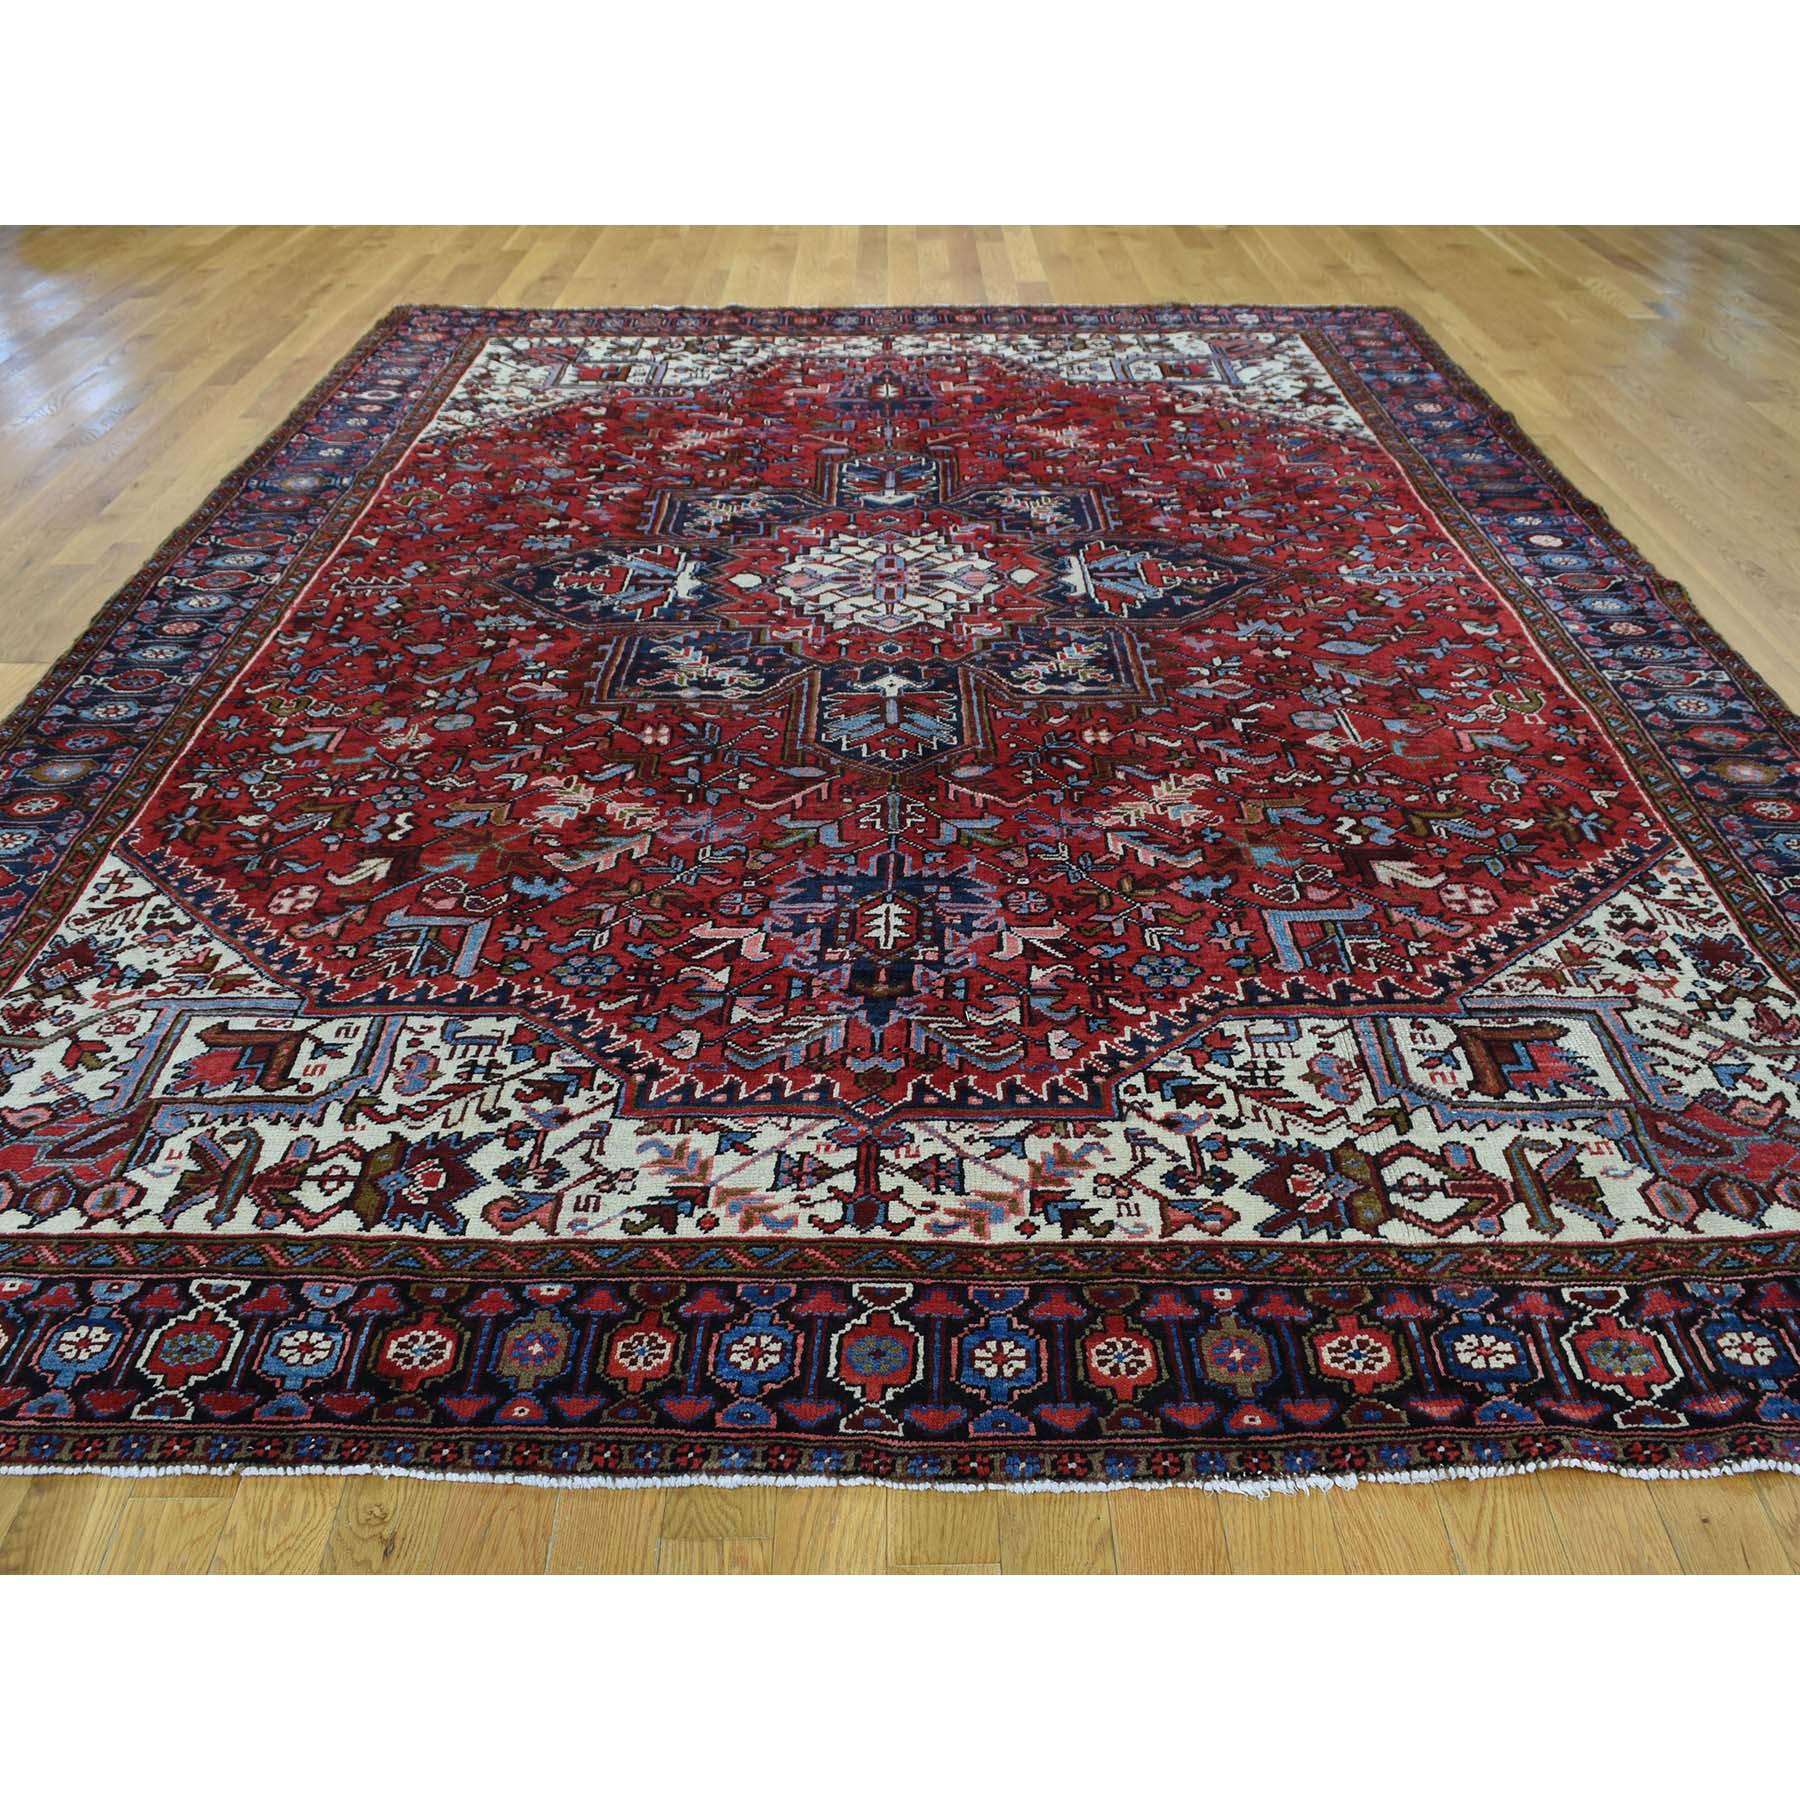 This is a truly genuine one-of-a-kind excellent condition semi antique Persian Heriz hand knotted rug. It was made in the centuries-old Persian weaving craftsmanship techniques by expert artisans. Measures: 8'2